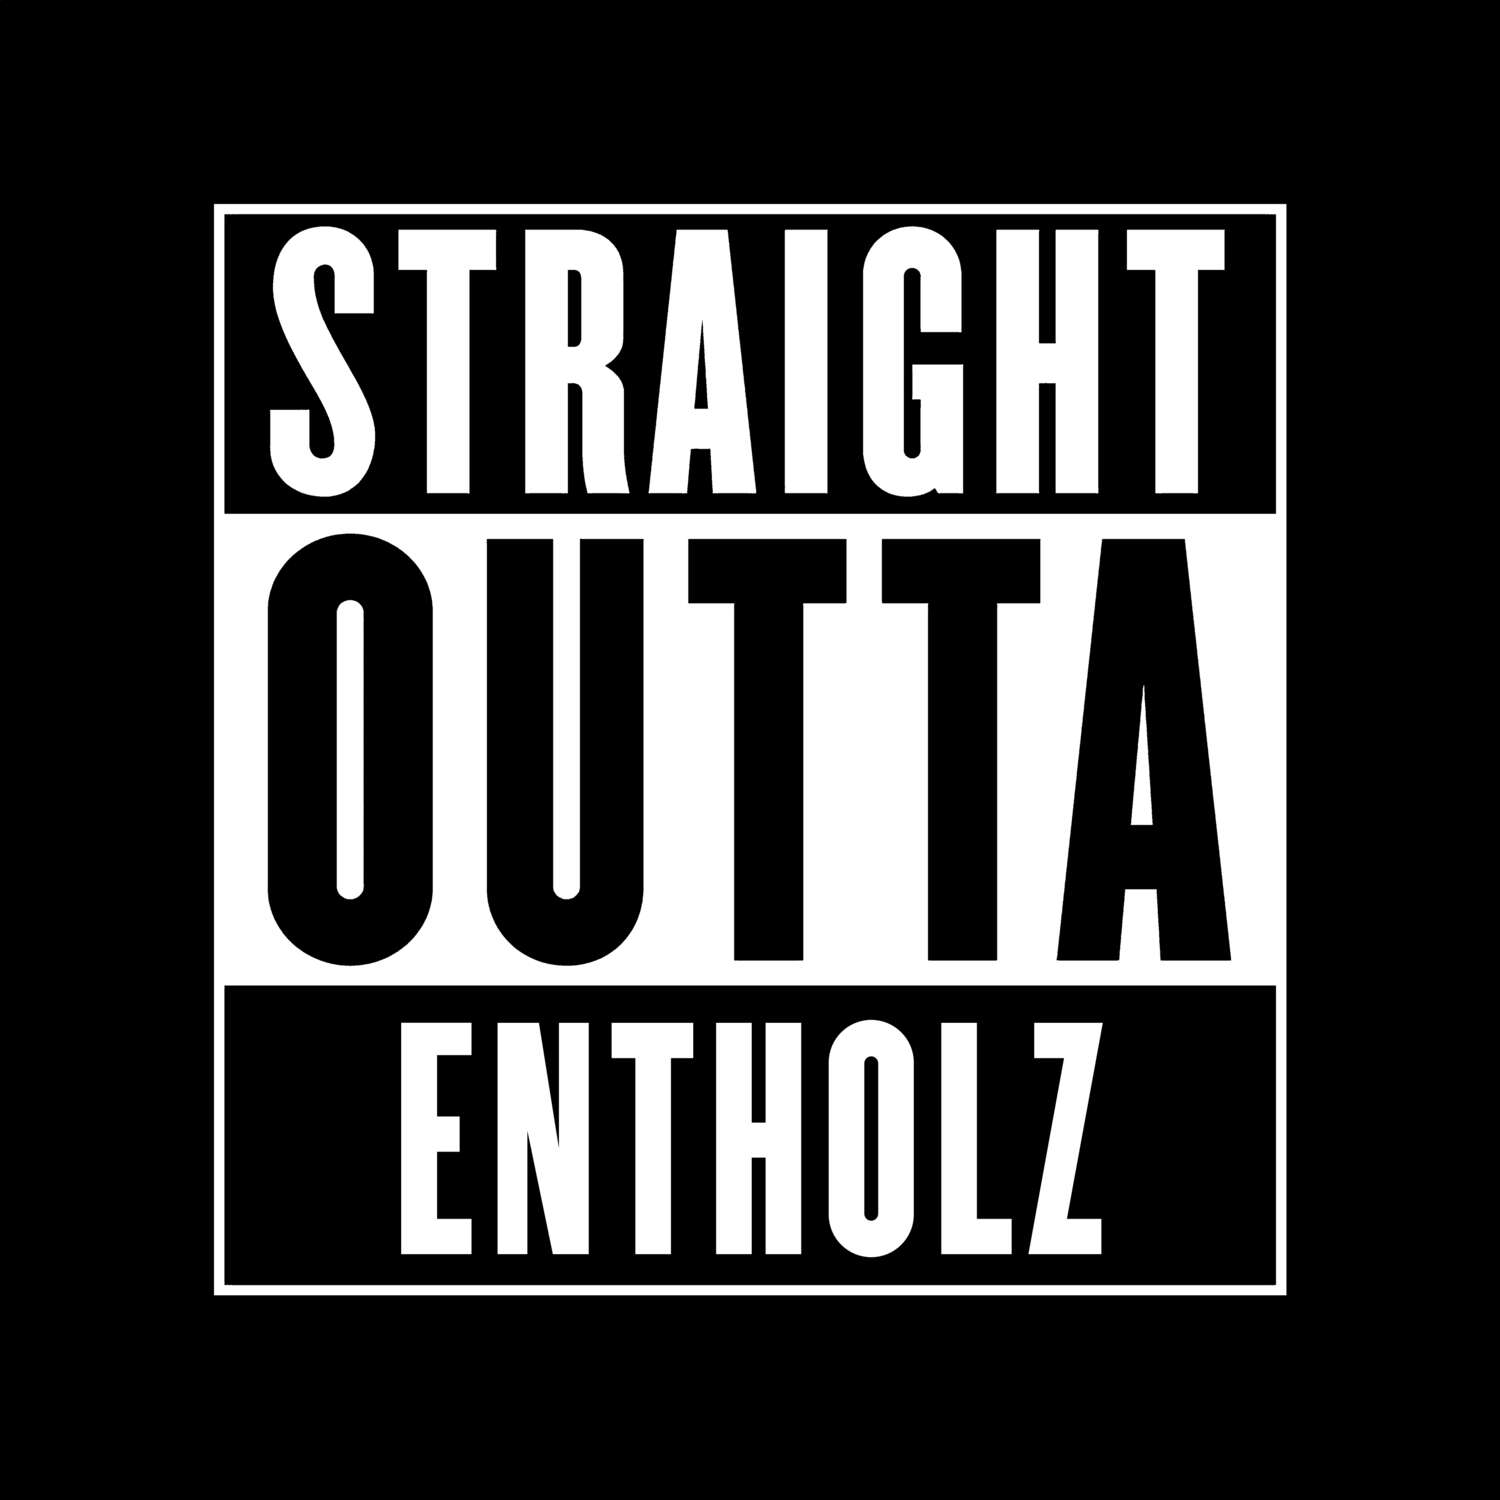 Entholz T-Shirt »Straight Outta«